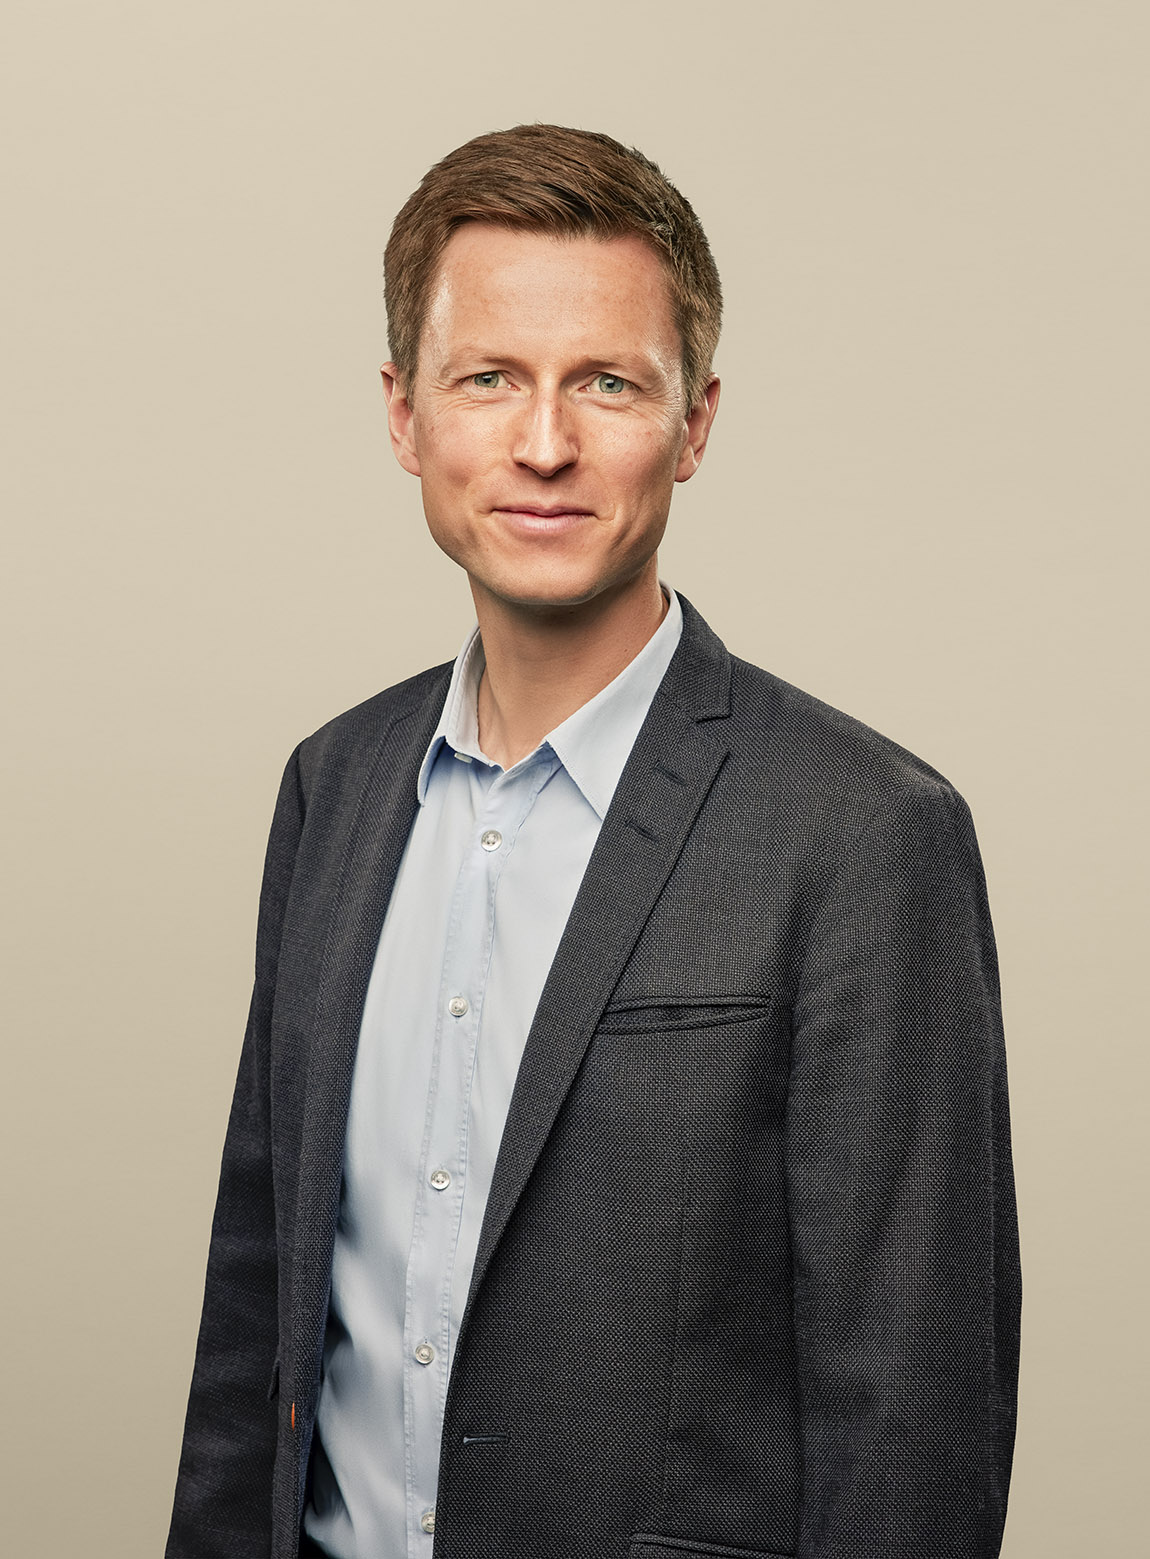 Danish Minister for Higher Education and Science, Jesper Petersen. Photo: Morten Fauerby / Montgomery